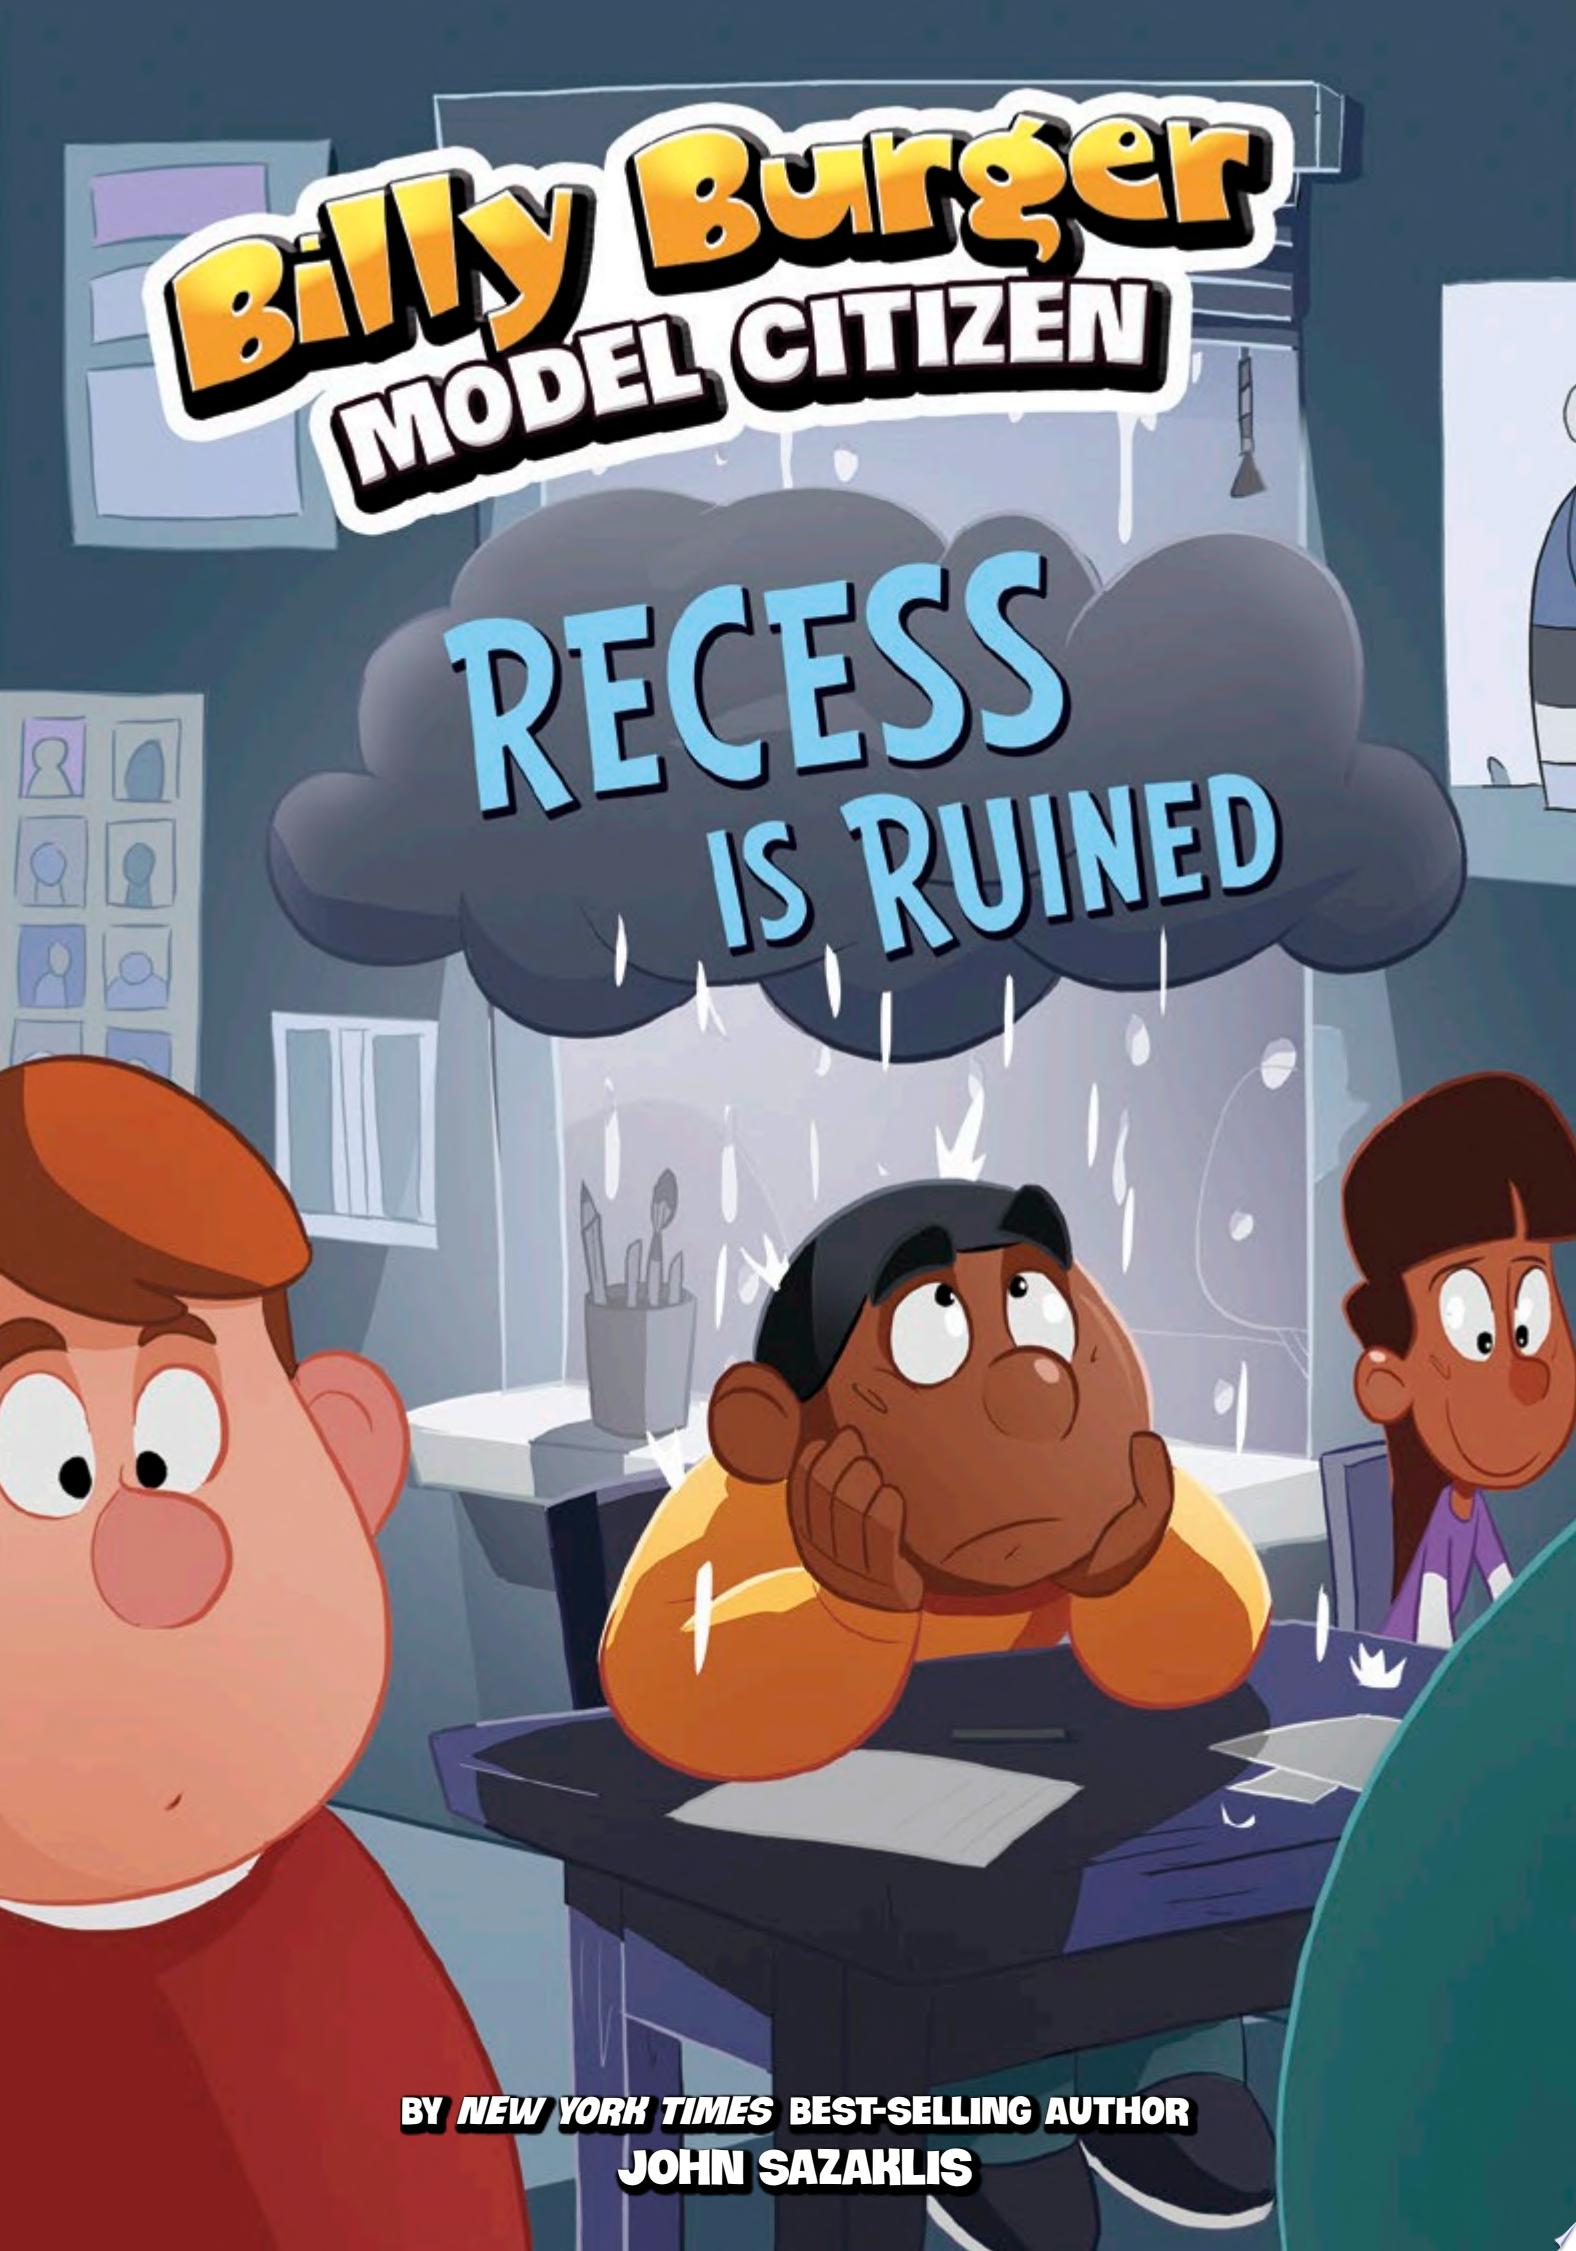 Image for "Recess Is Ruined"